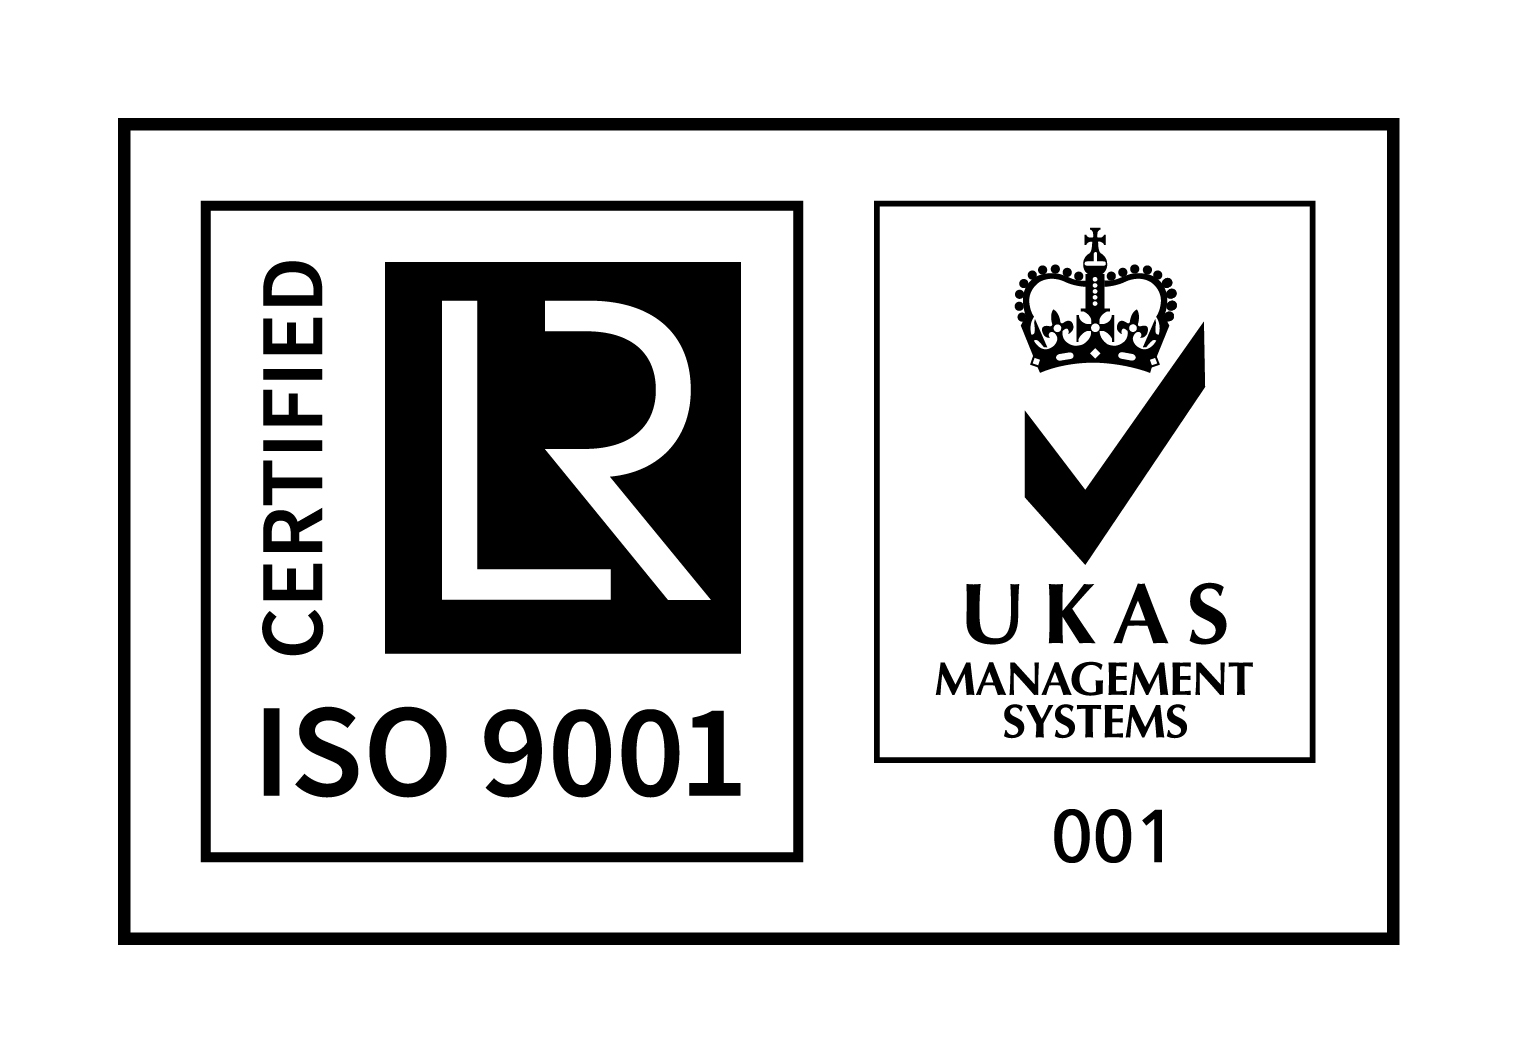 ISO 9001 - UKAS Management System